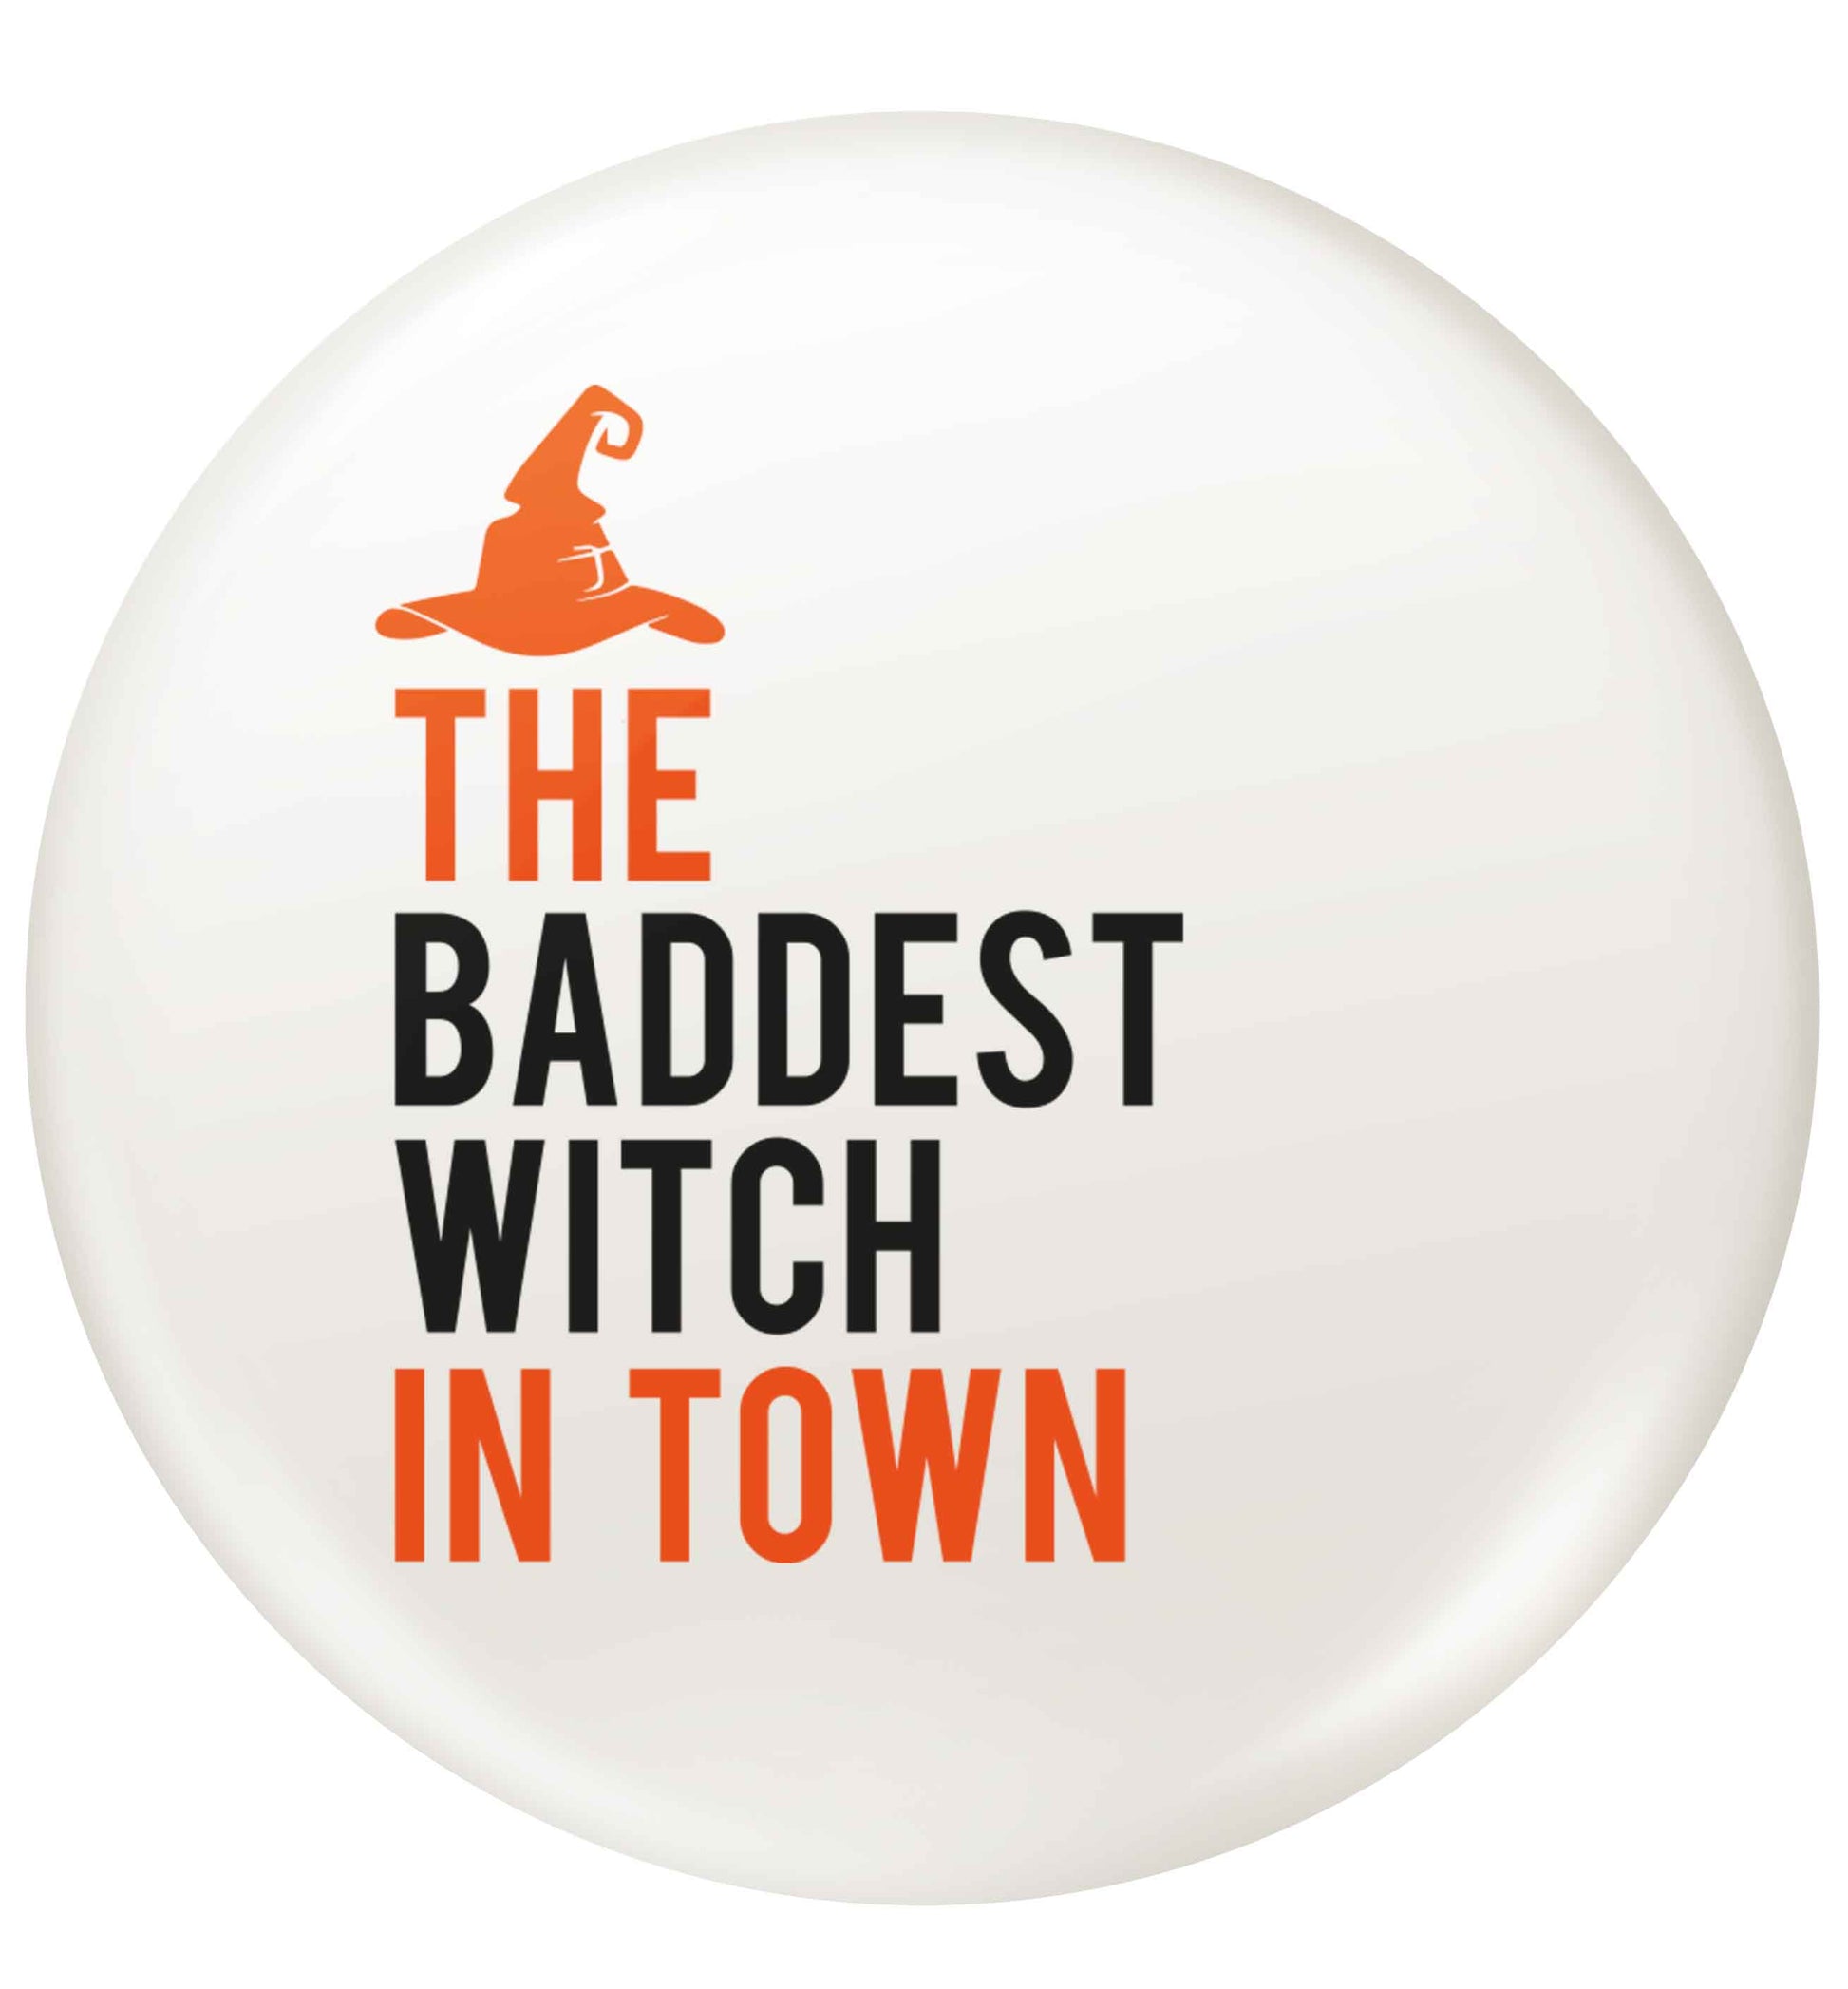 Badest witch in town small 25mm Pin badge